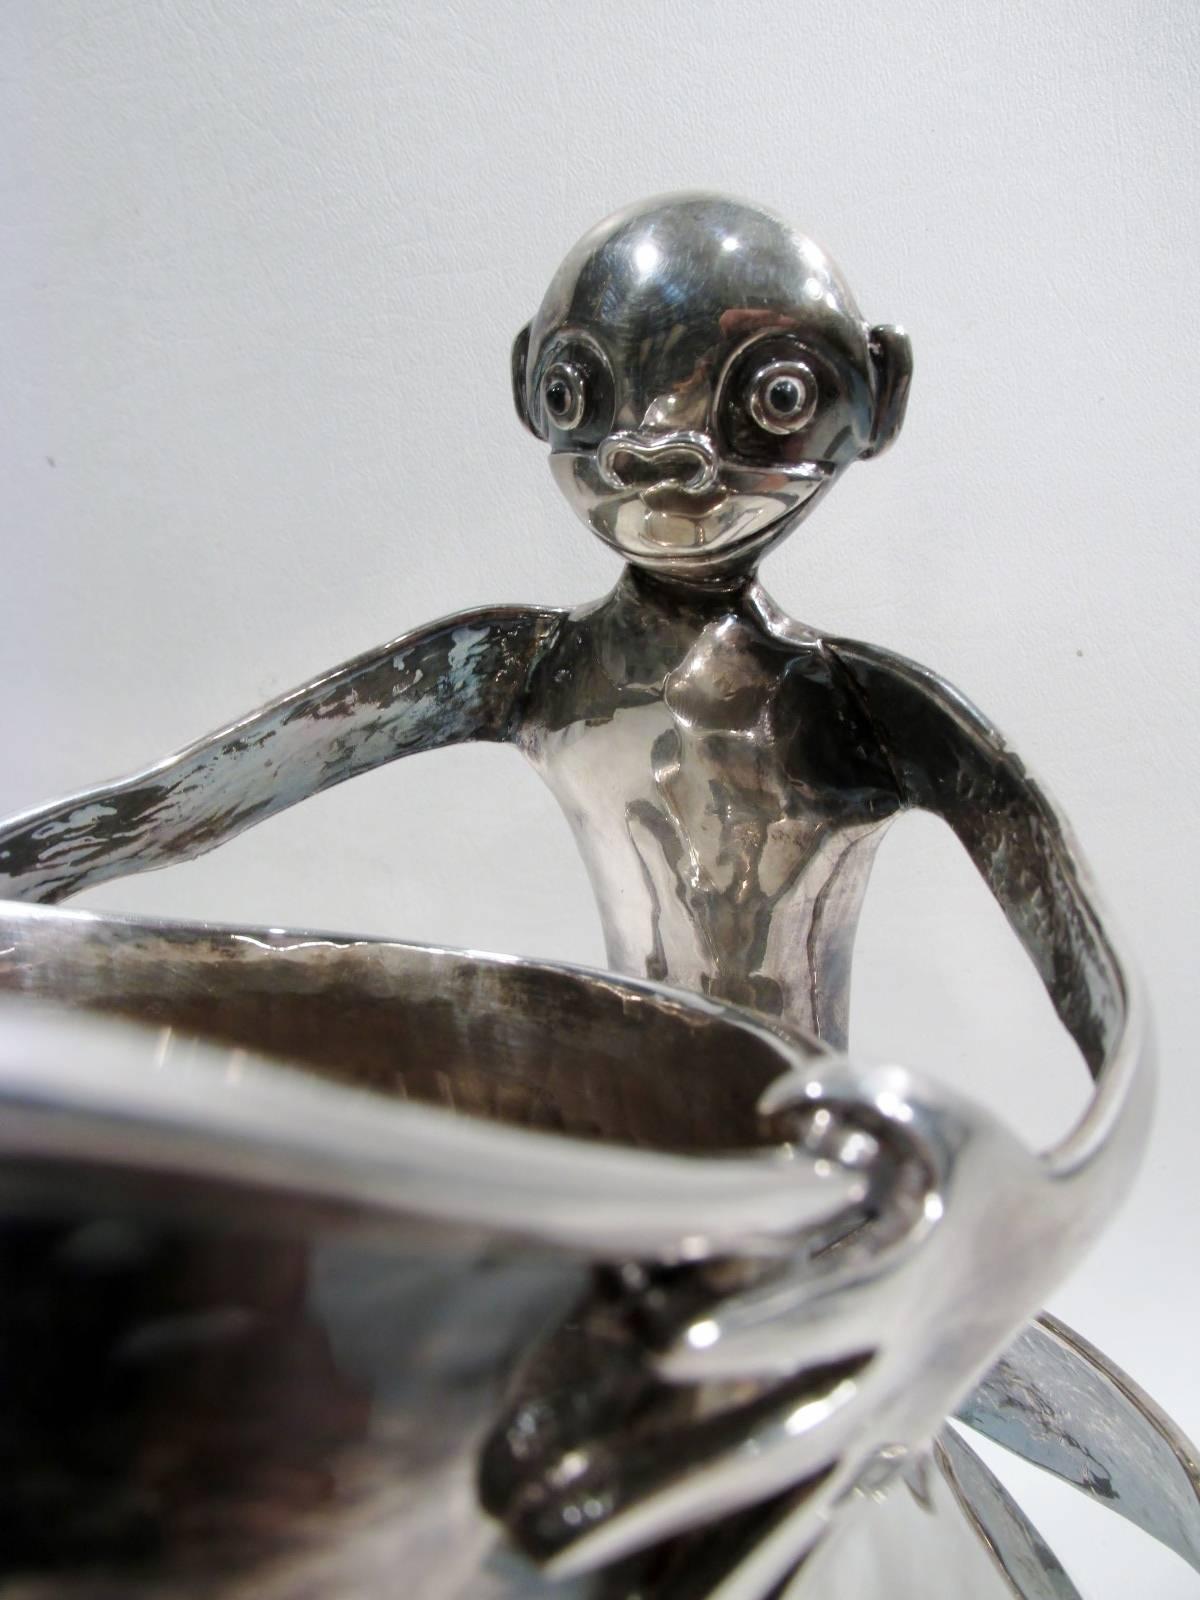 Fine figural drink pitcher from the renowned Taxco Mexico workshop of Emilia Castillo. Heavy silver plate on copper with whimsical monkey form handle and hand-hammered surface finish.

Emilia descends from a fine family tree of renowned Taxco